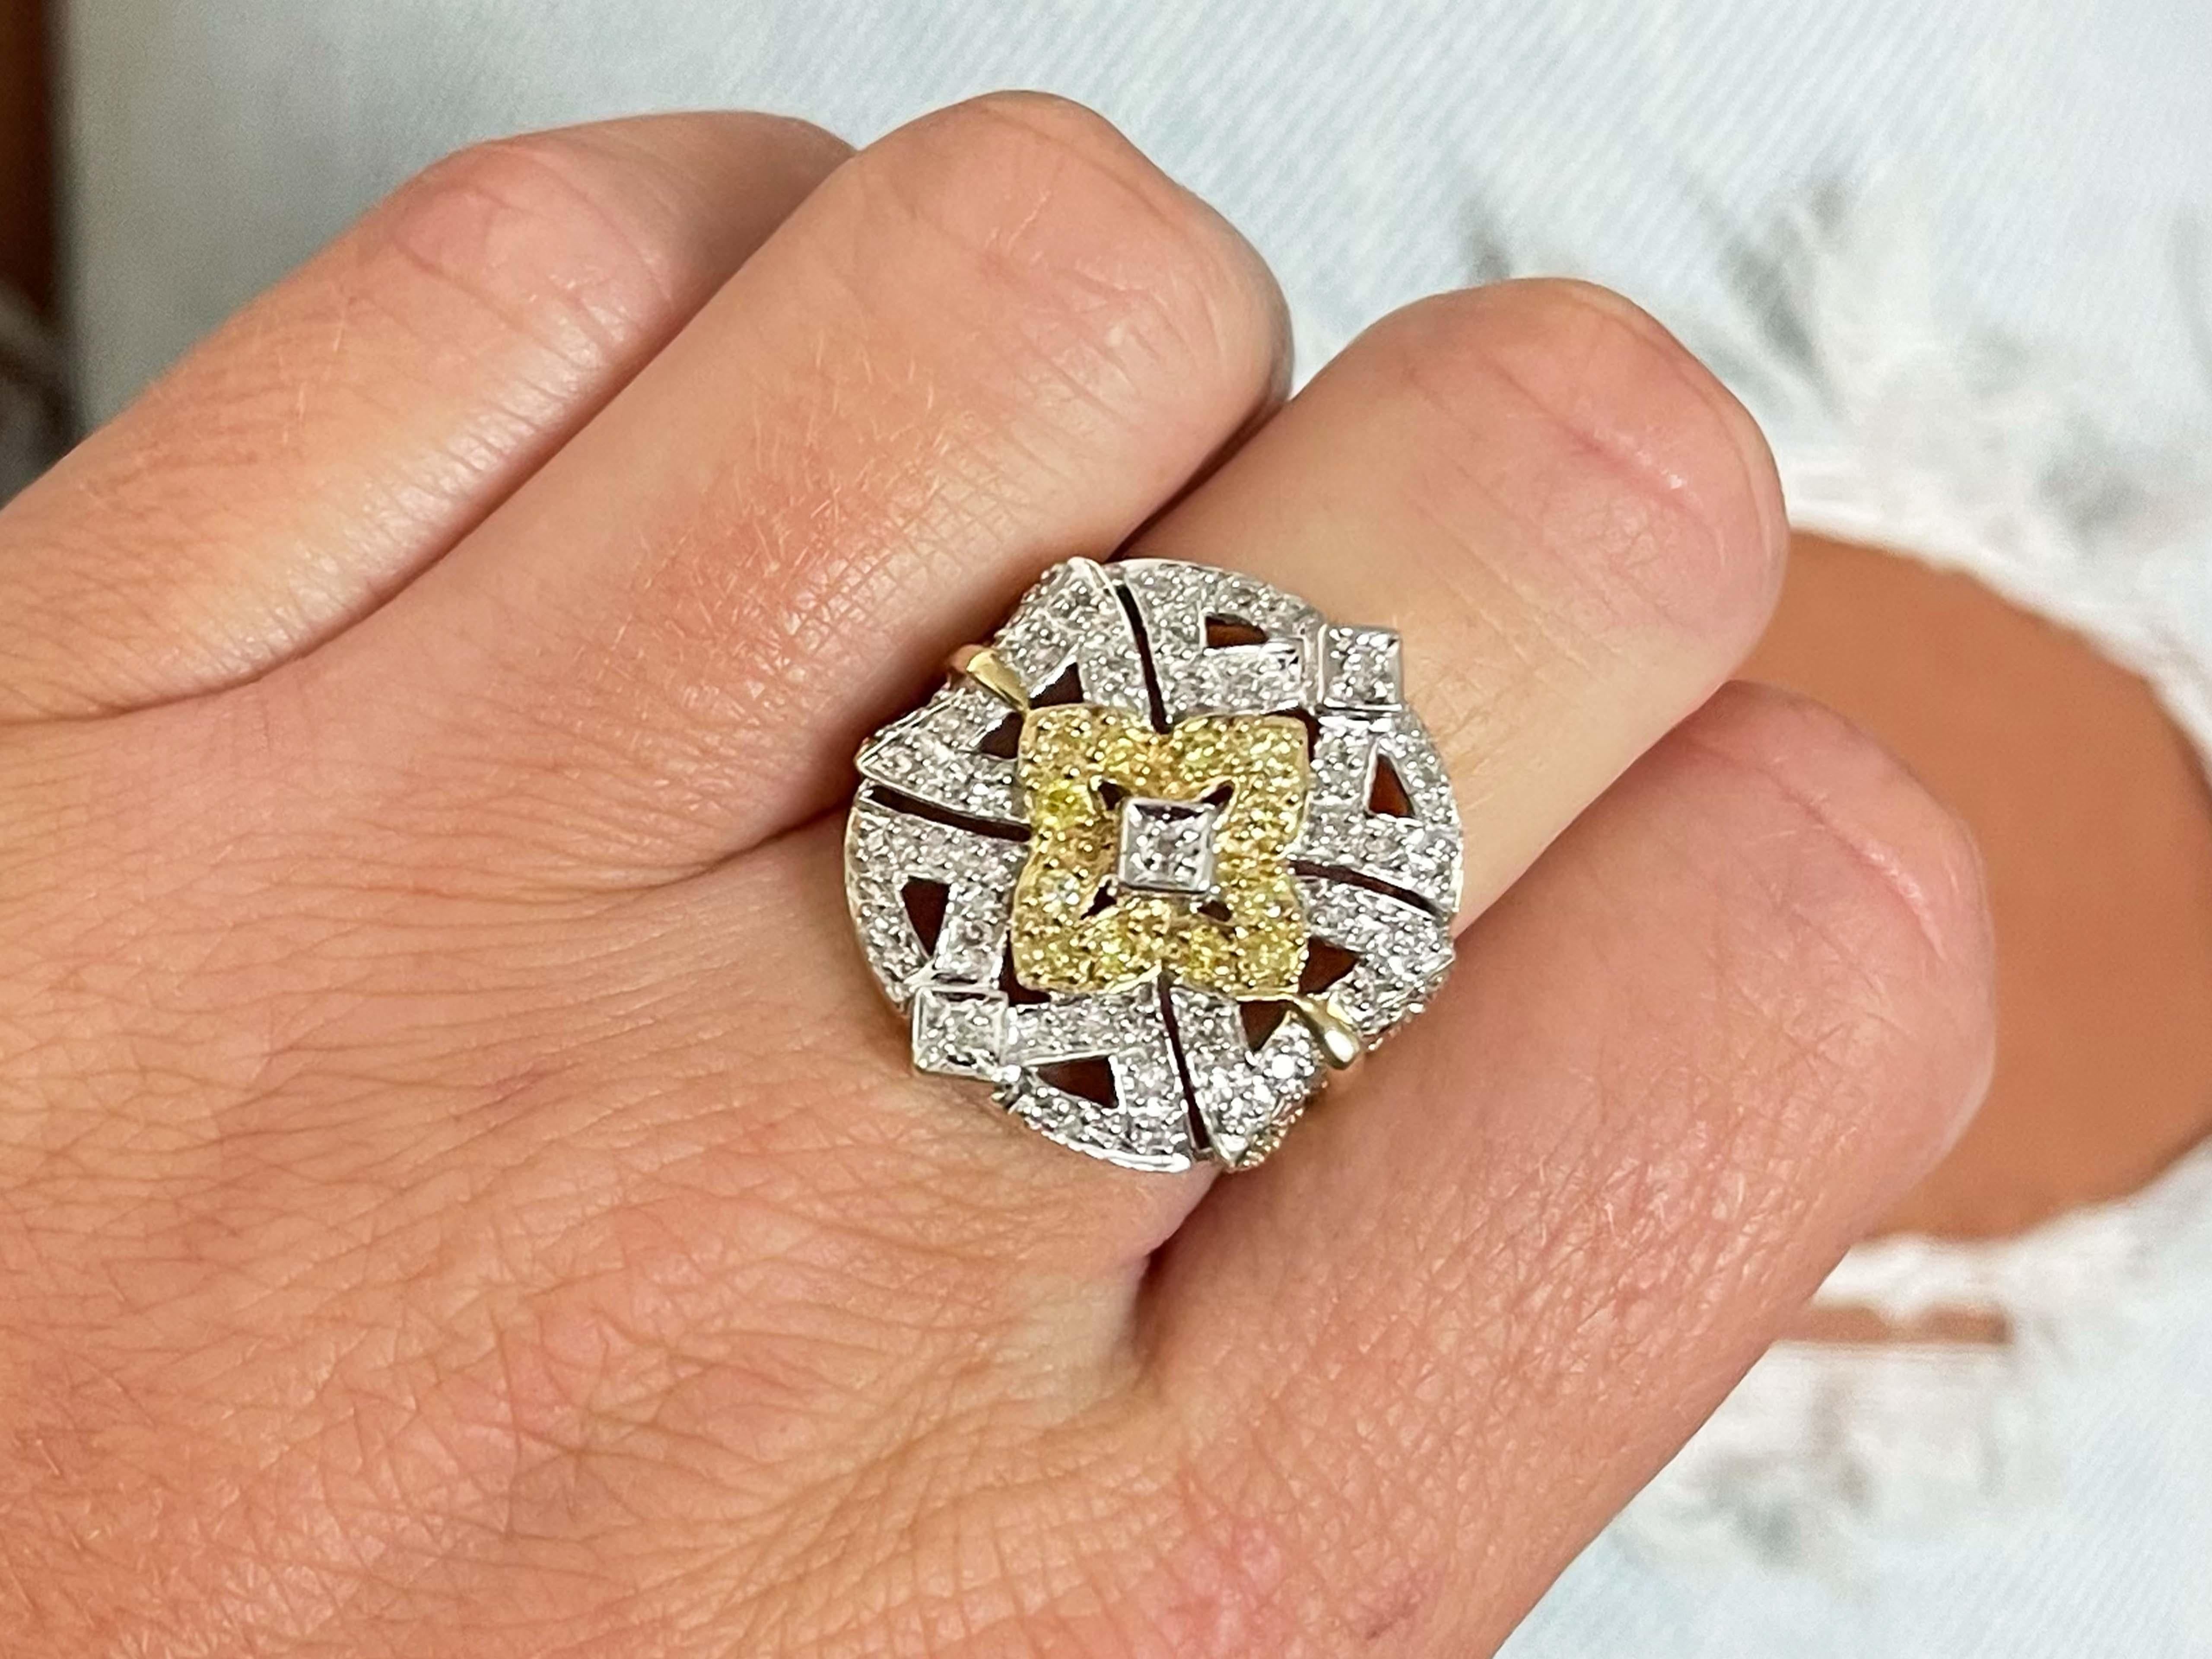 Item Specifications:

Metal: 14K White Gold

Style: Statement Ring

Ring Size: 6 (resizing available for a fee)

Total Weight: 6.50 Grams

Ring Width: 22.8 mm x 21 mm

White Diamond Carat Weight: ~0.20 carats

Yellow Diamond Carat Weight: ~0.15